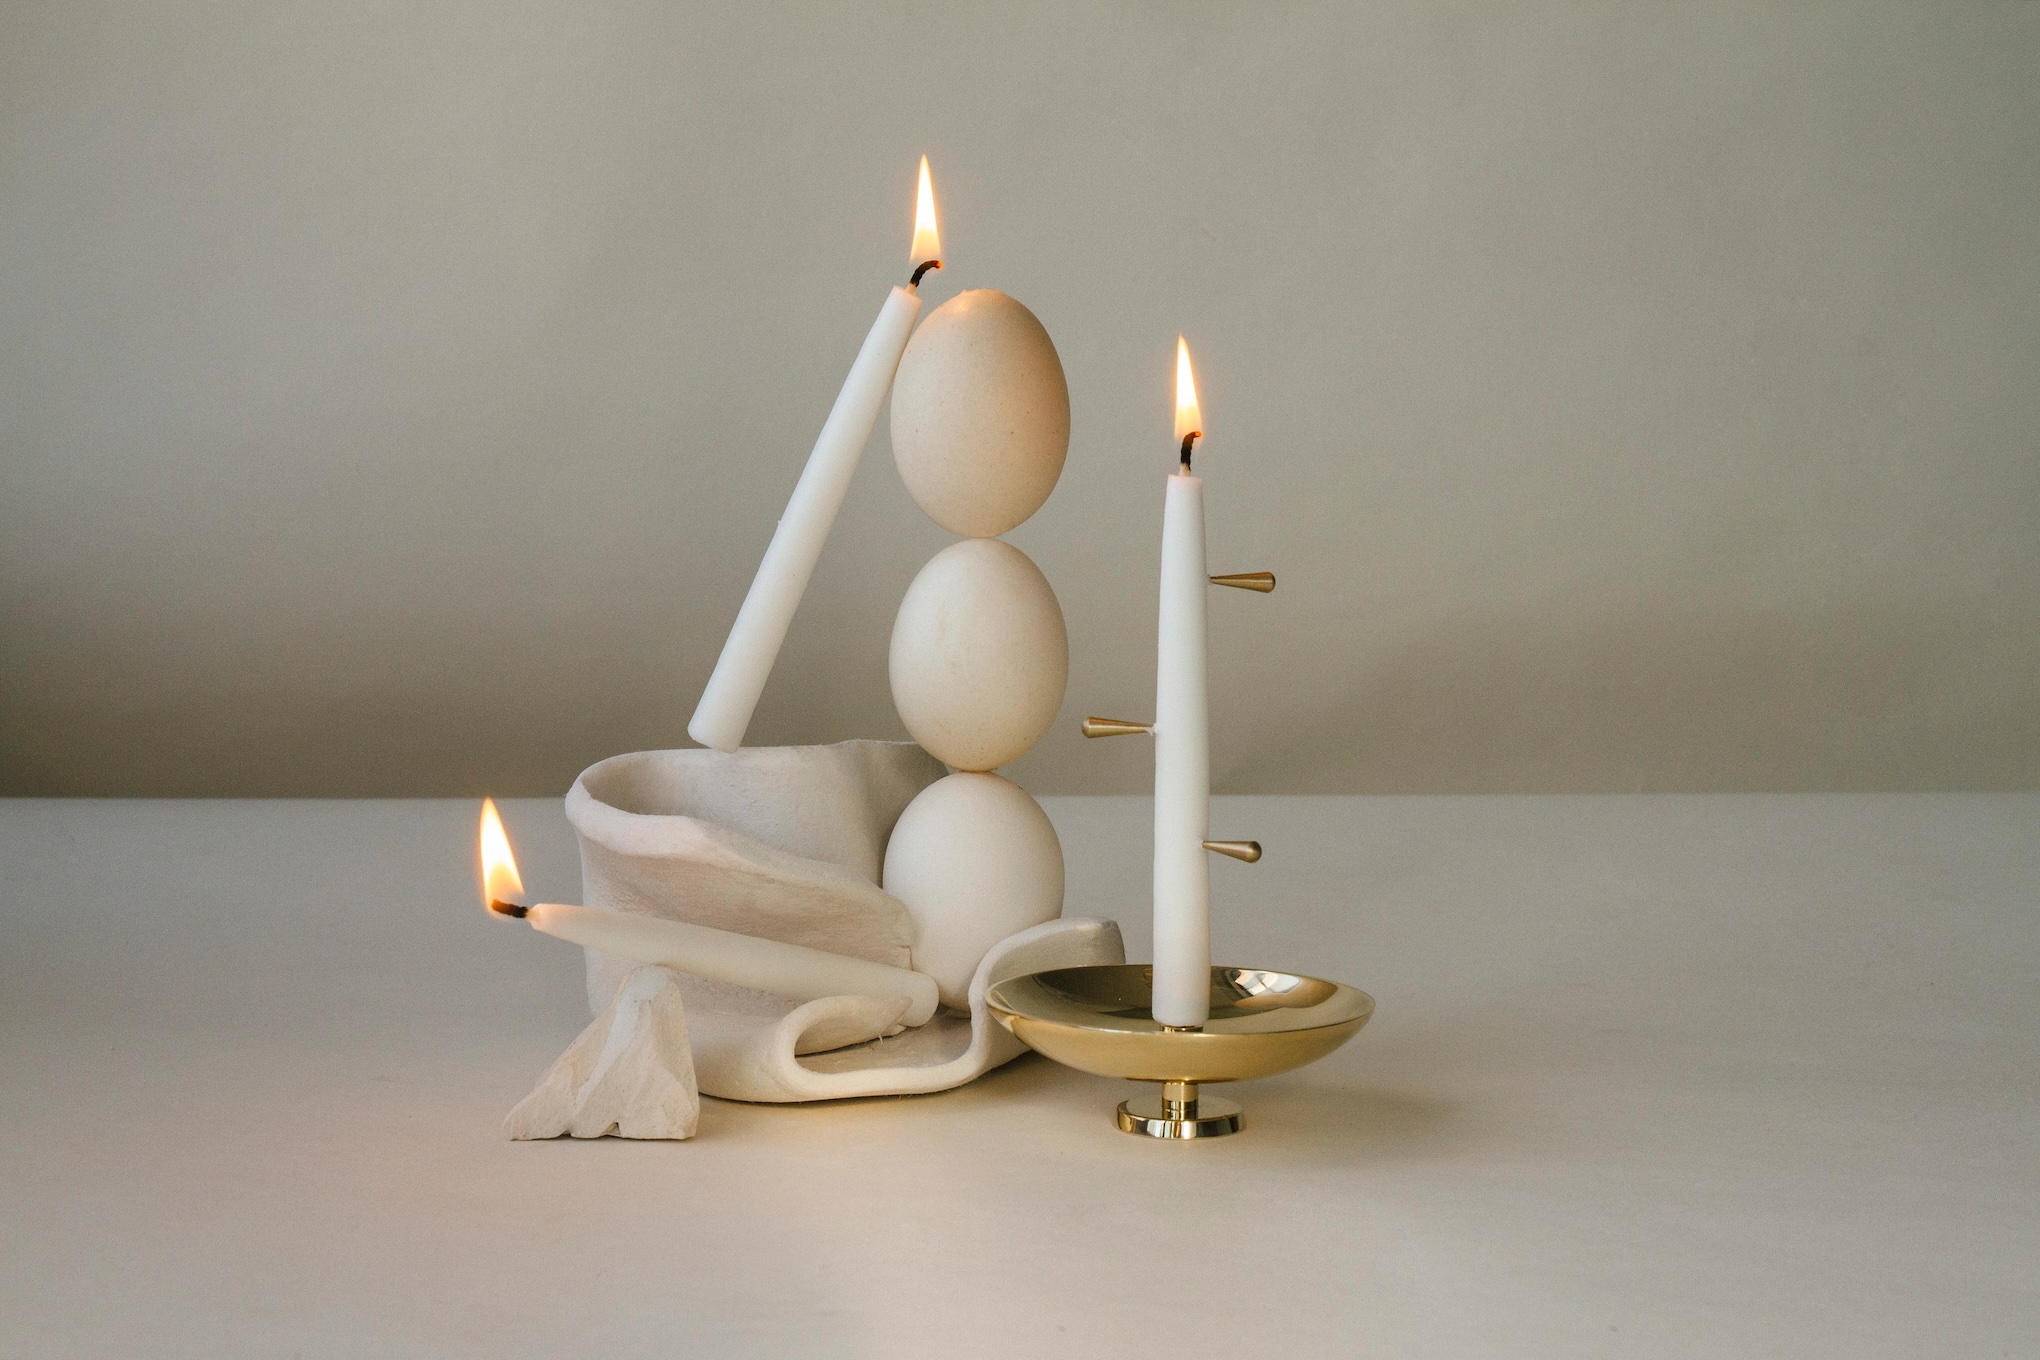 three taper candles are burning on minimalist wooden sculpture